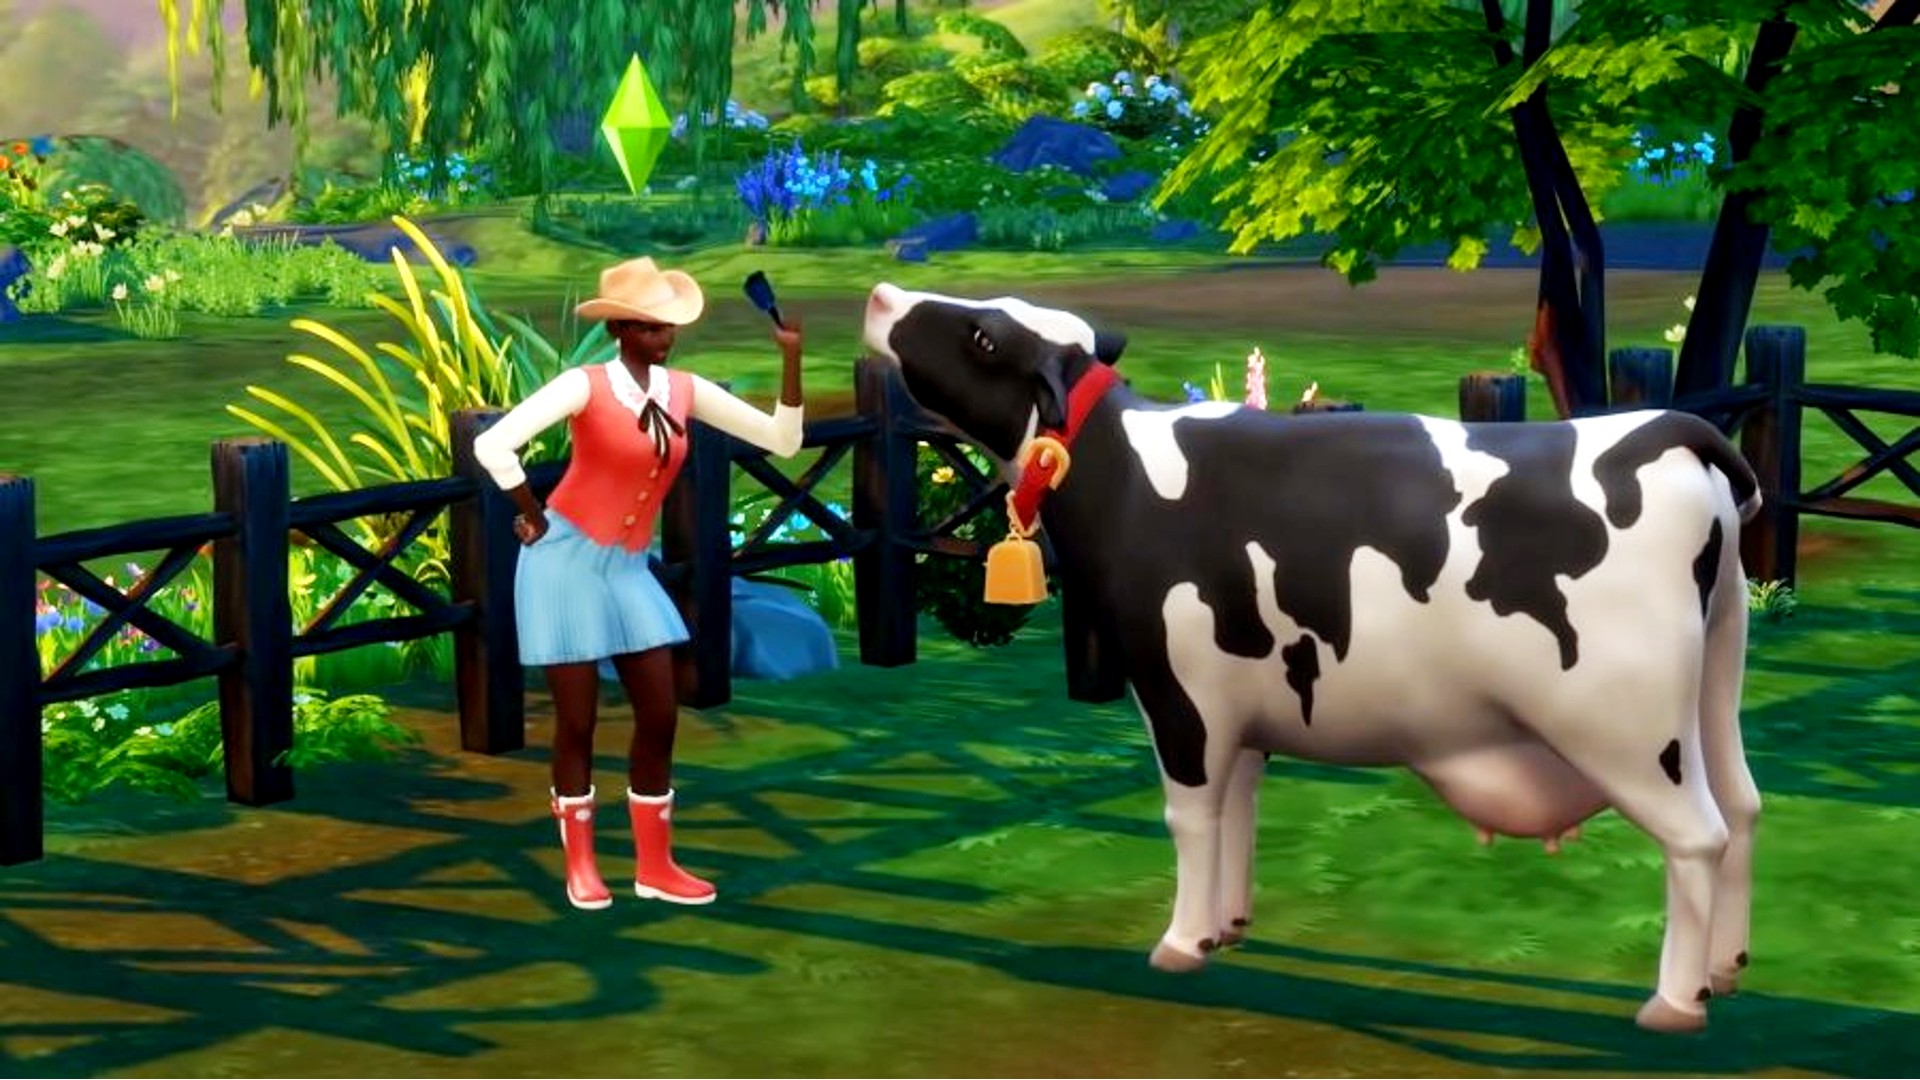 The Sims 4 cheats – all codes for money, relationships, and more